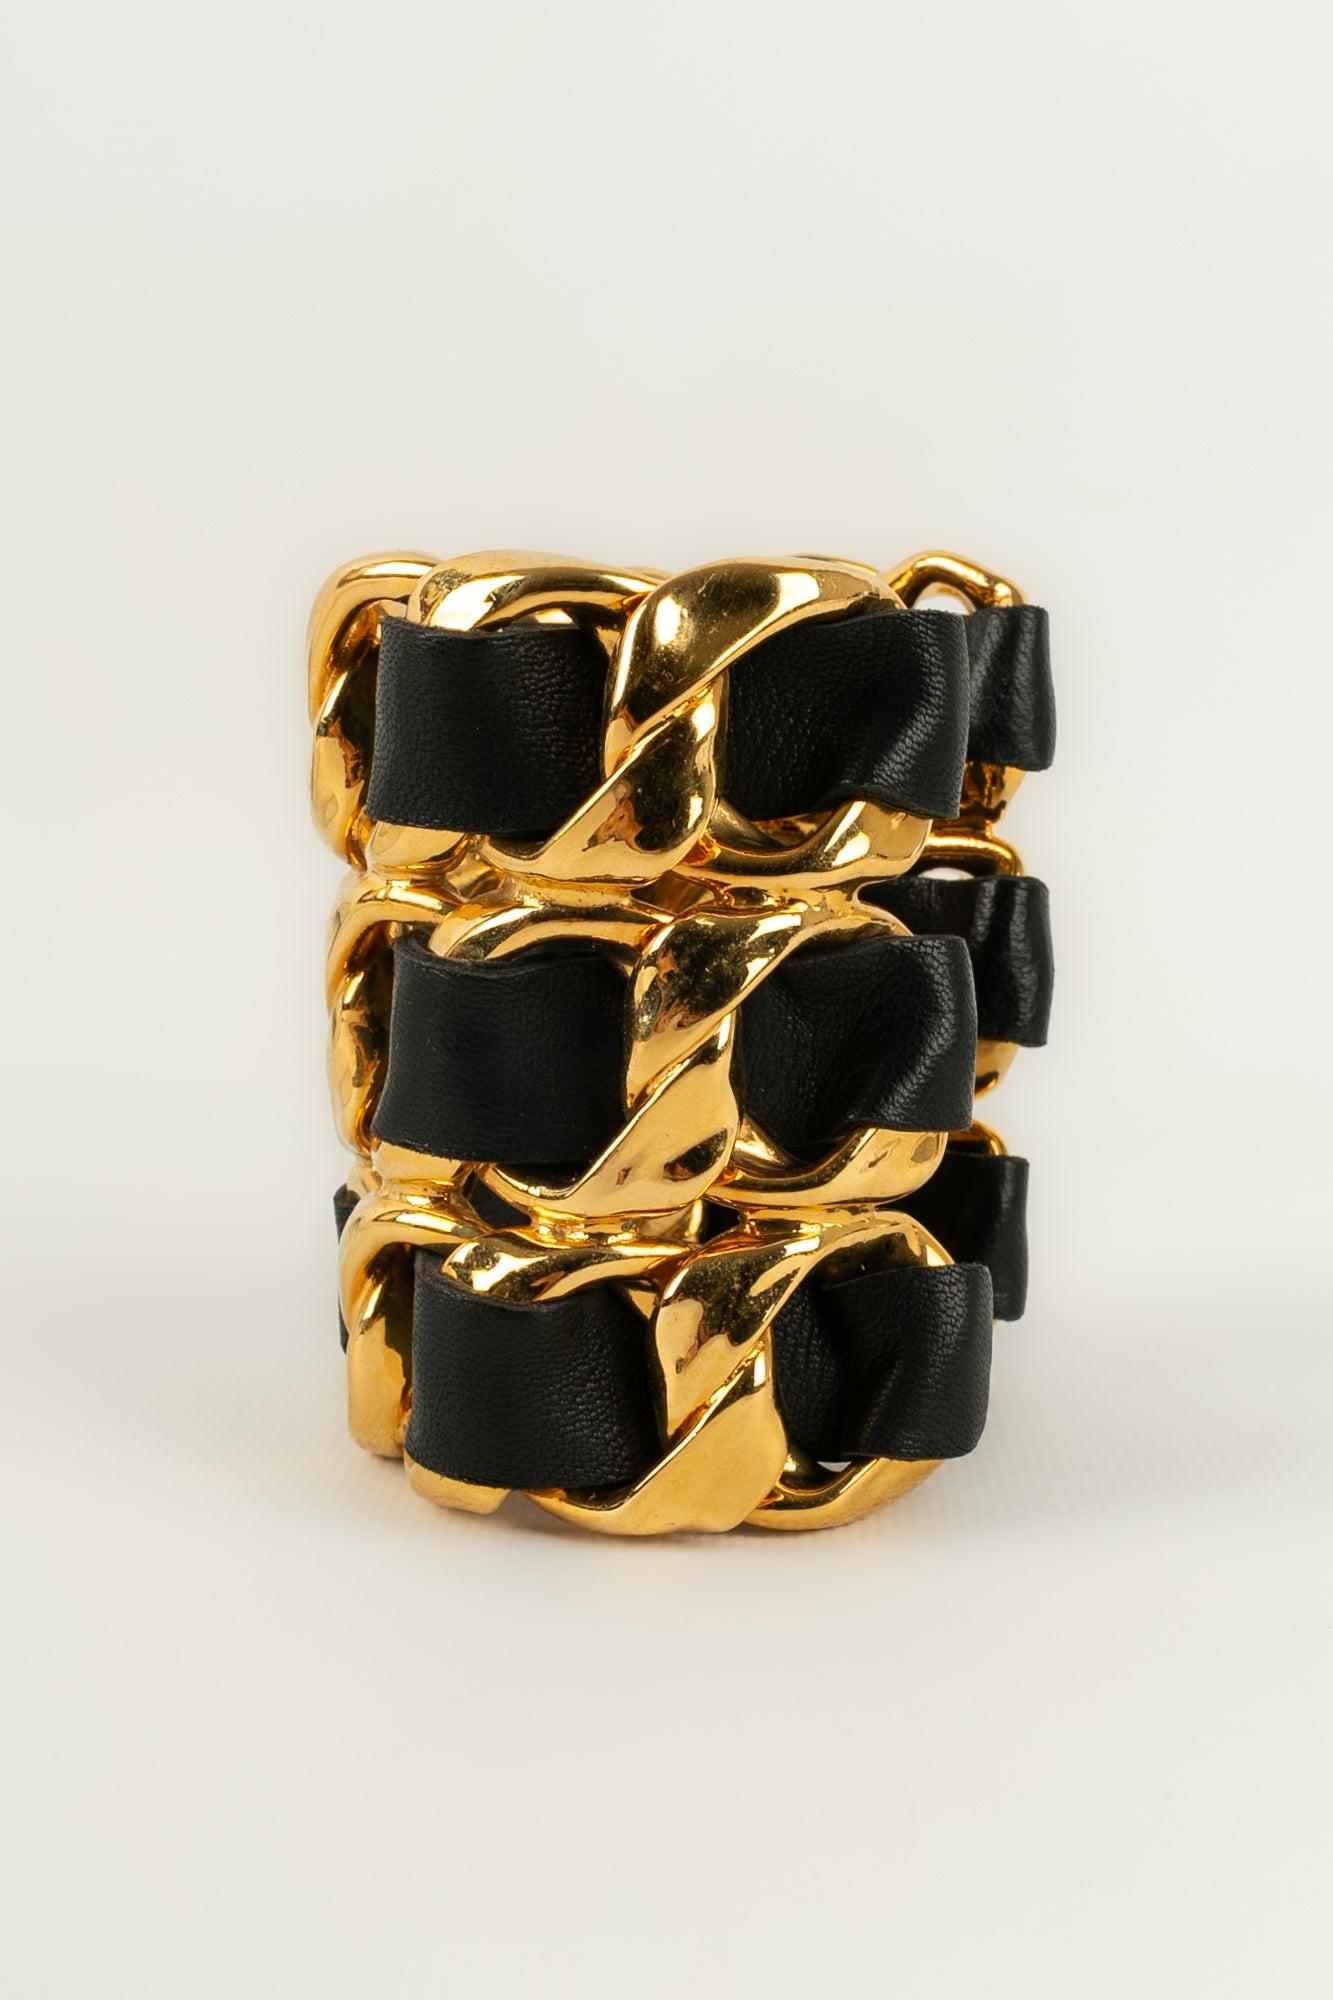 Women's Chanel Cuff Bracelet in Golden Metal and Black Leather For Sale